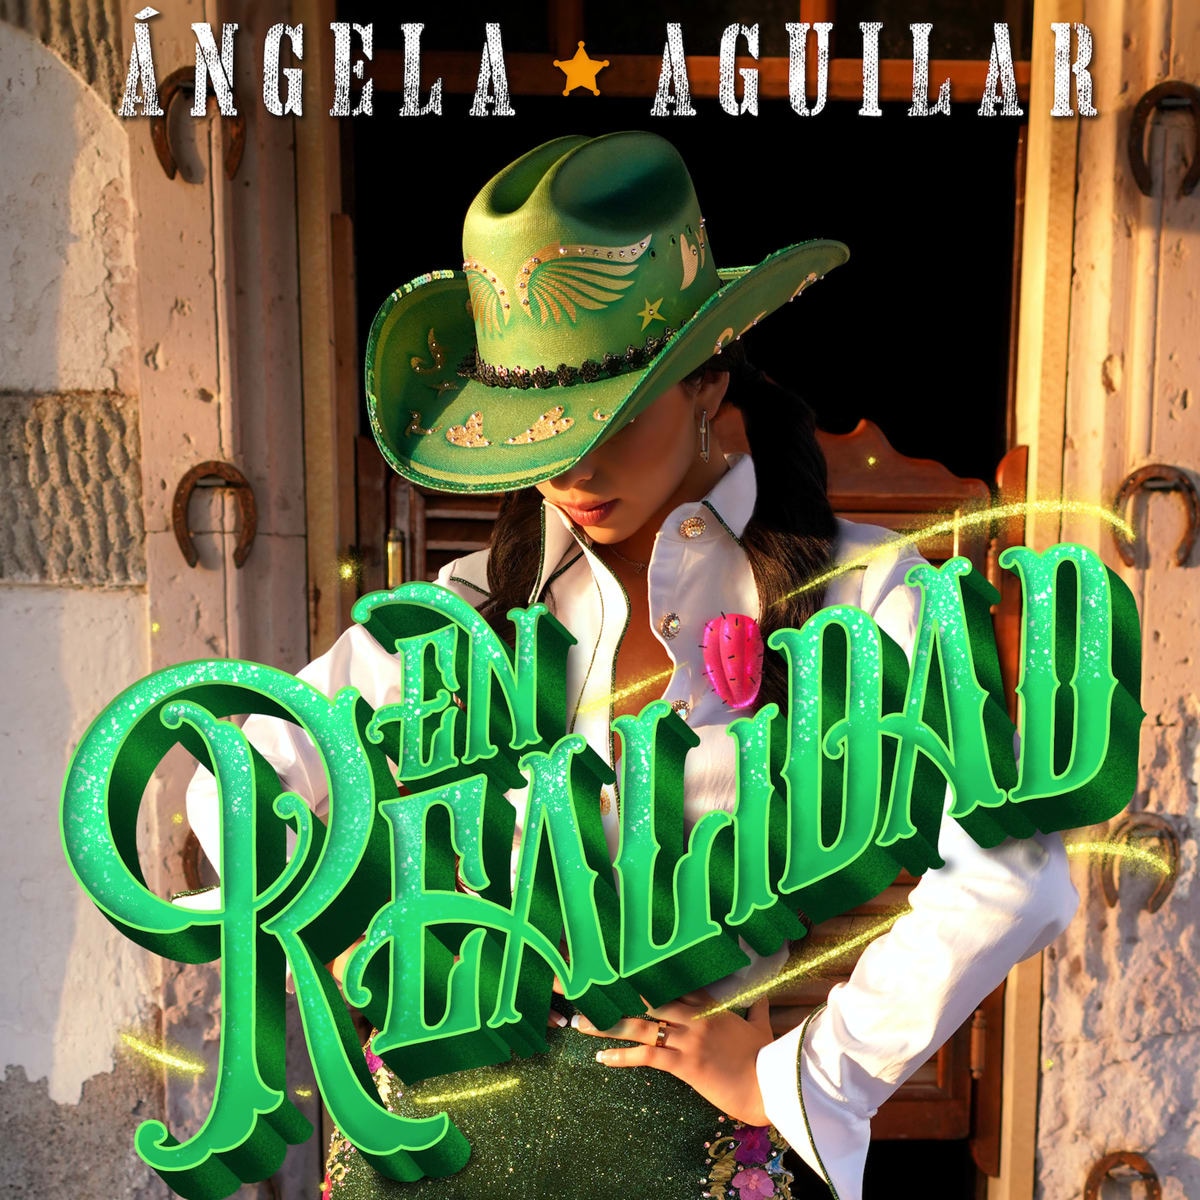 Ángela Aguilar releases new song and music video